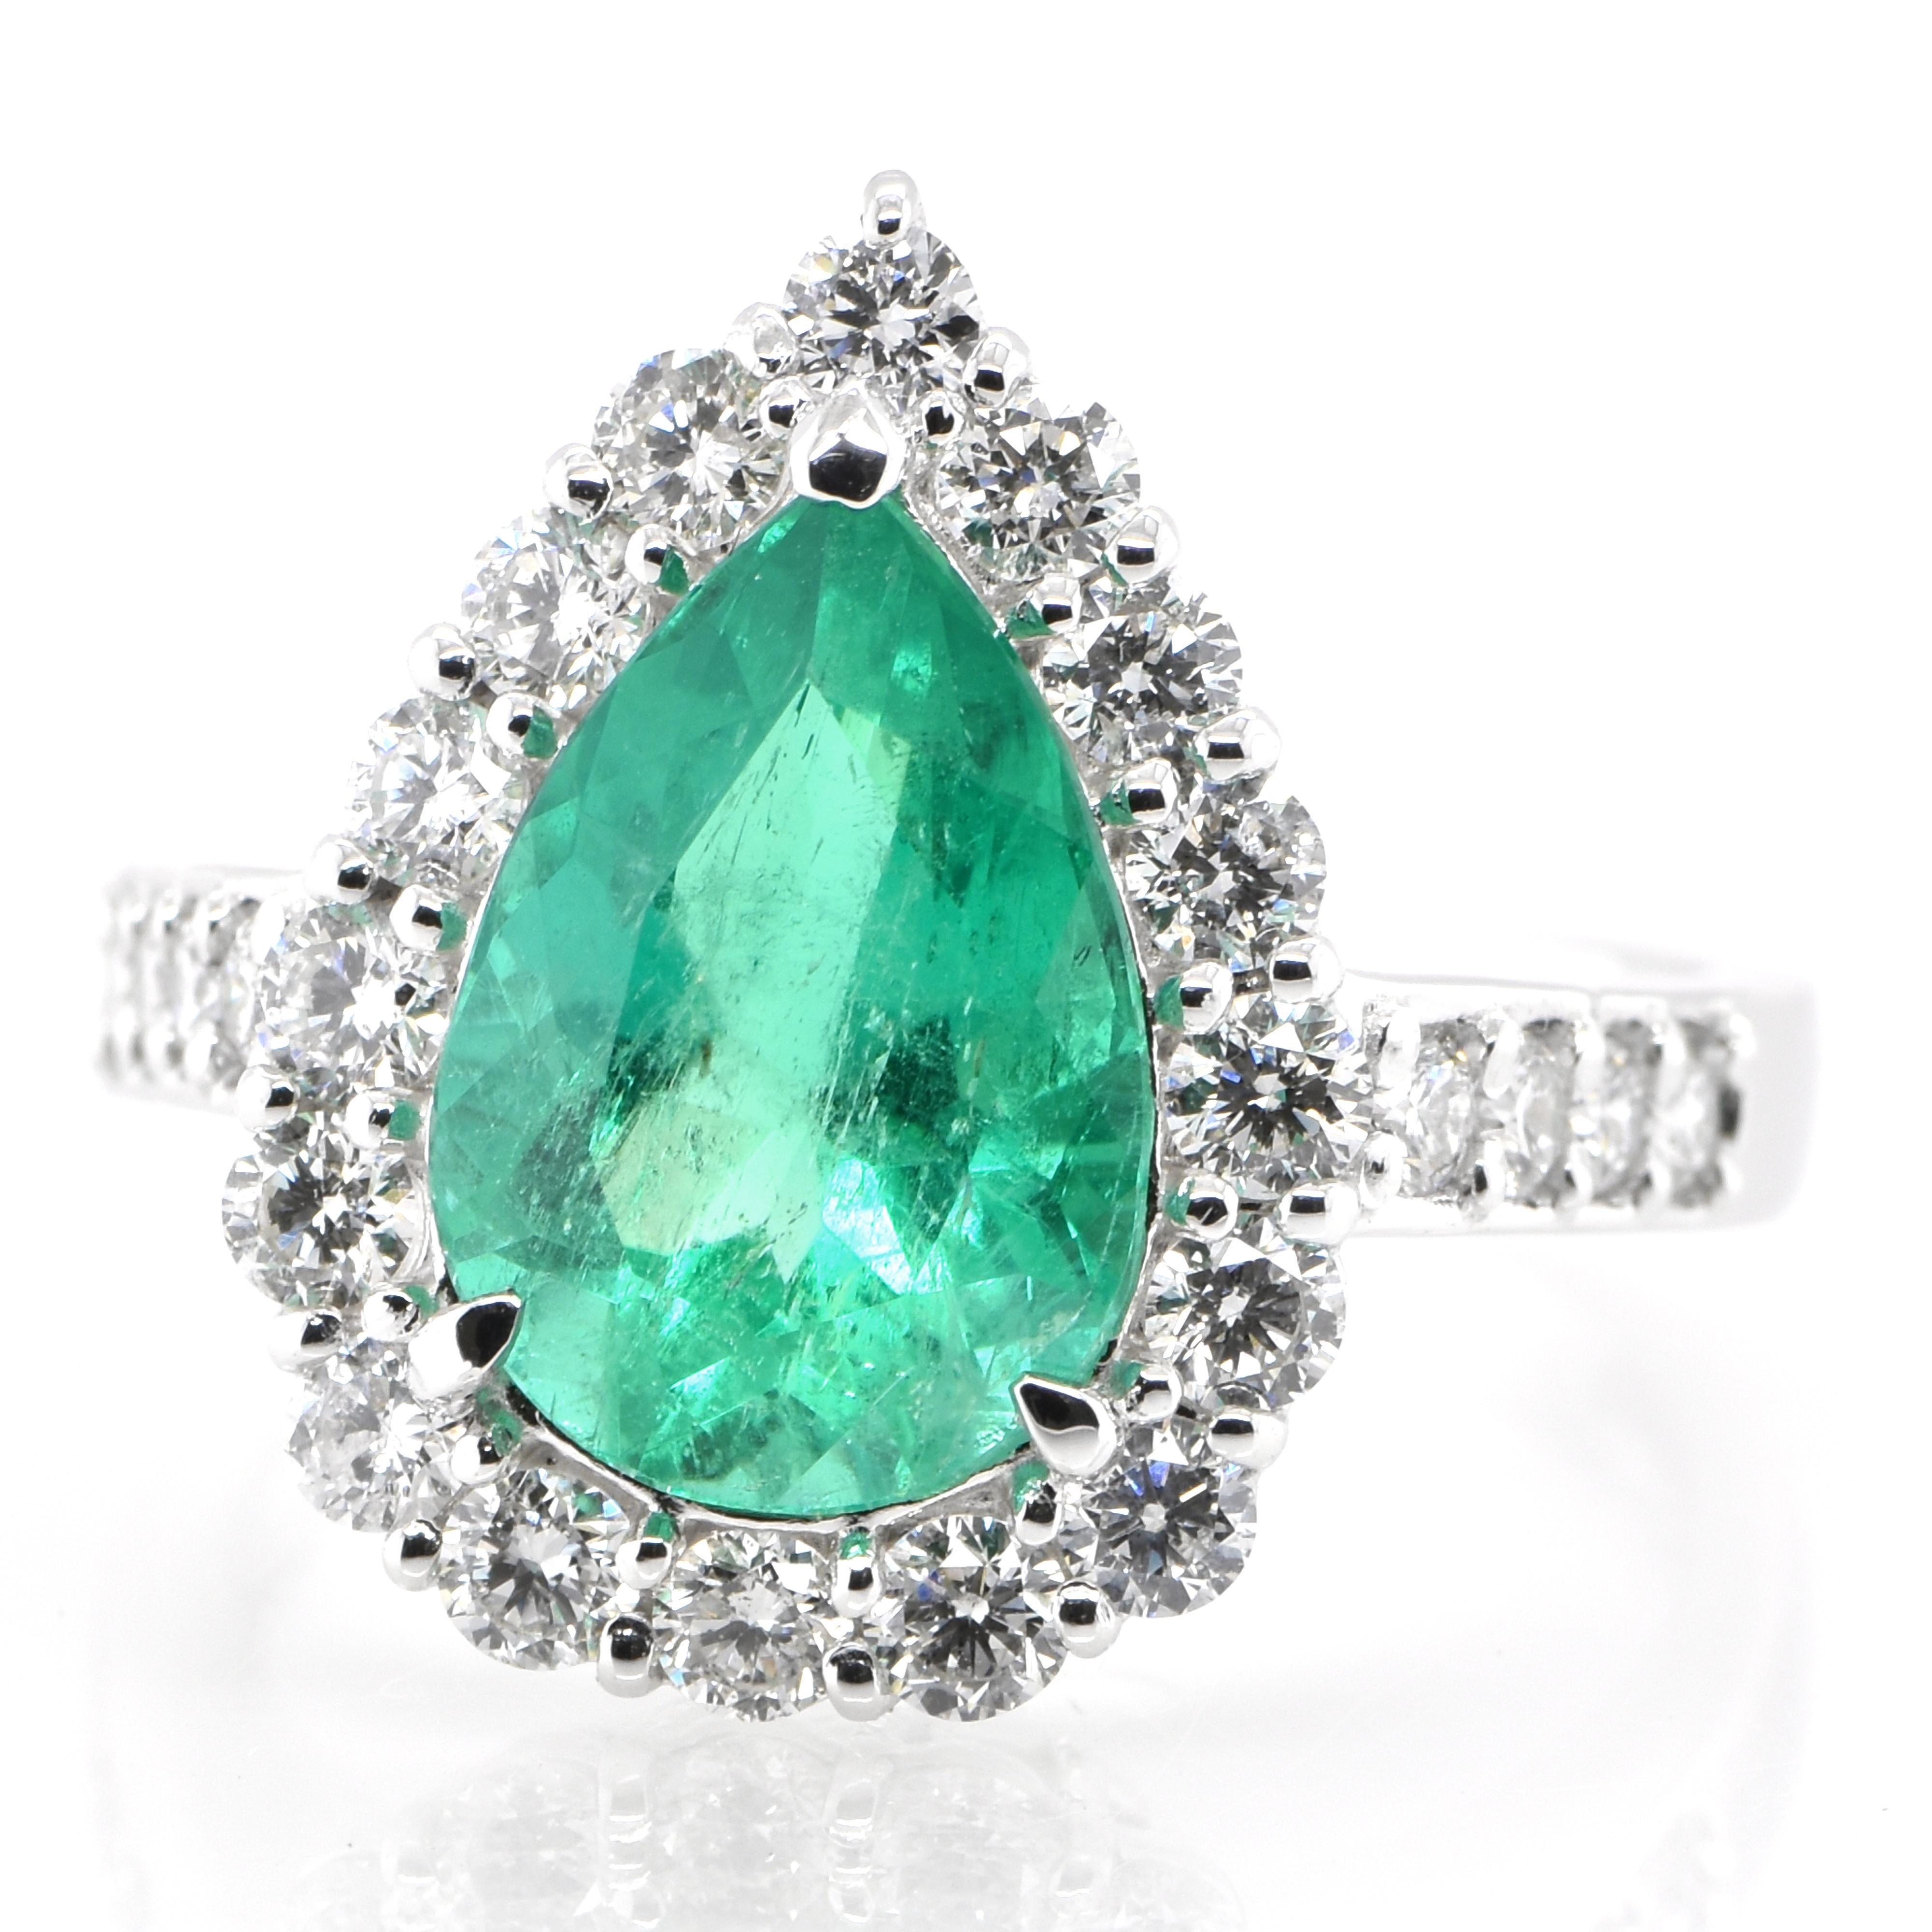 A stunning ring featuring a 2.50 Carat Natural Pear-Cut Emerald and 0.94 Carats of Diamond Accents set in Platinum. People have admired emerald’s green for thousands of years. Emeralds have always been associated with the lushest landscapes and the